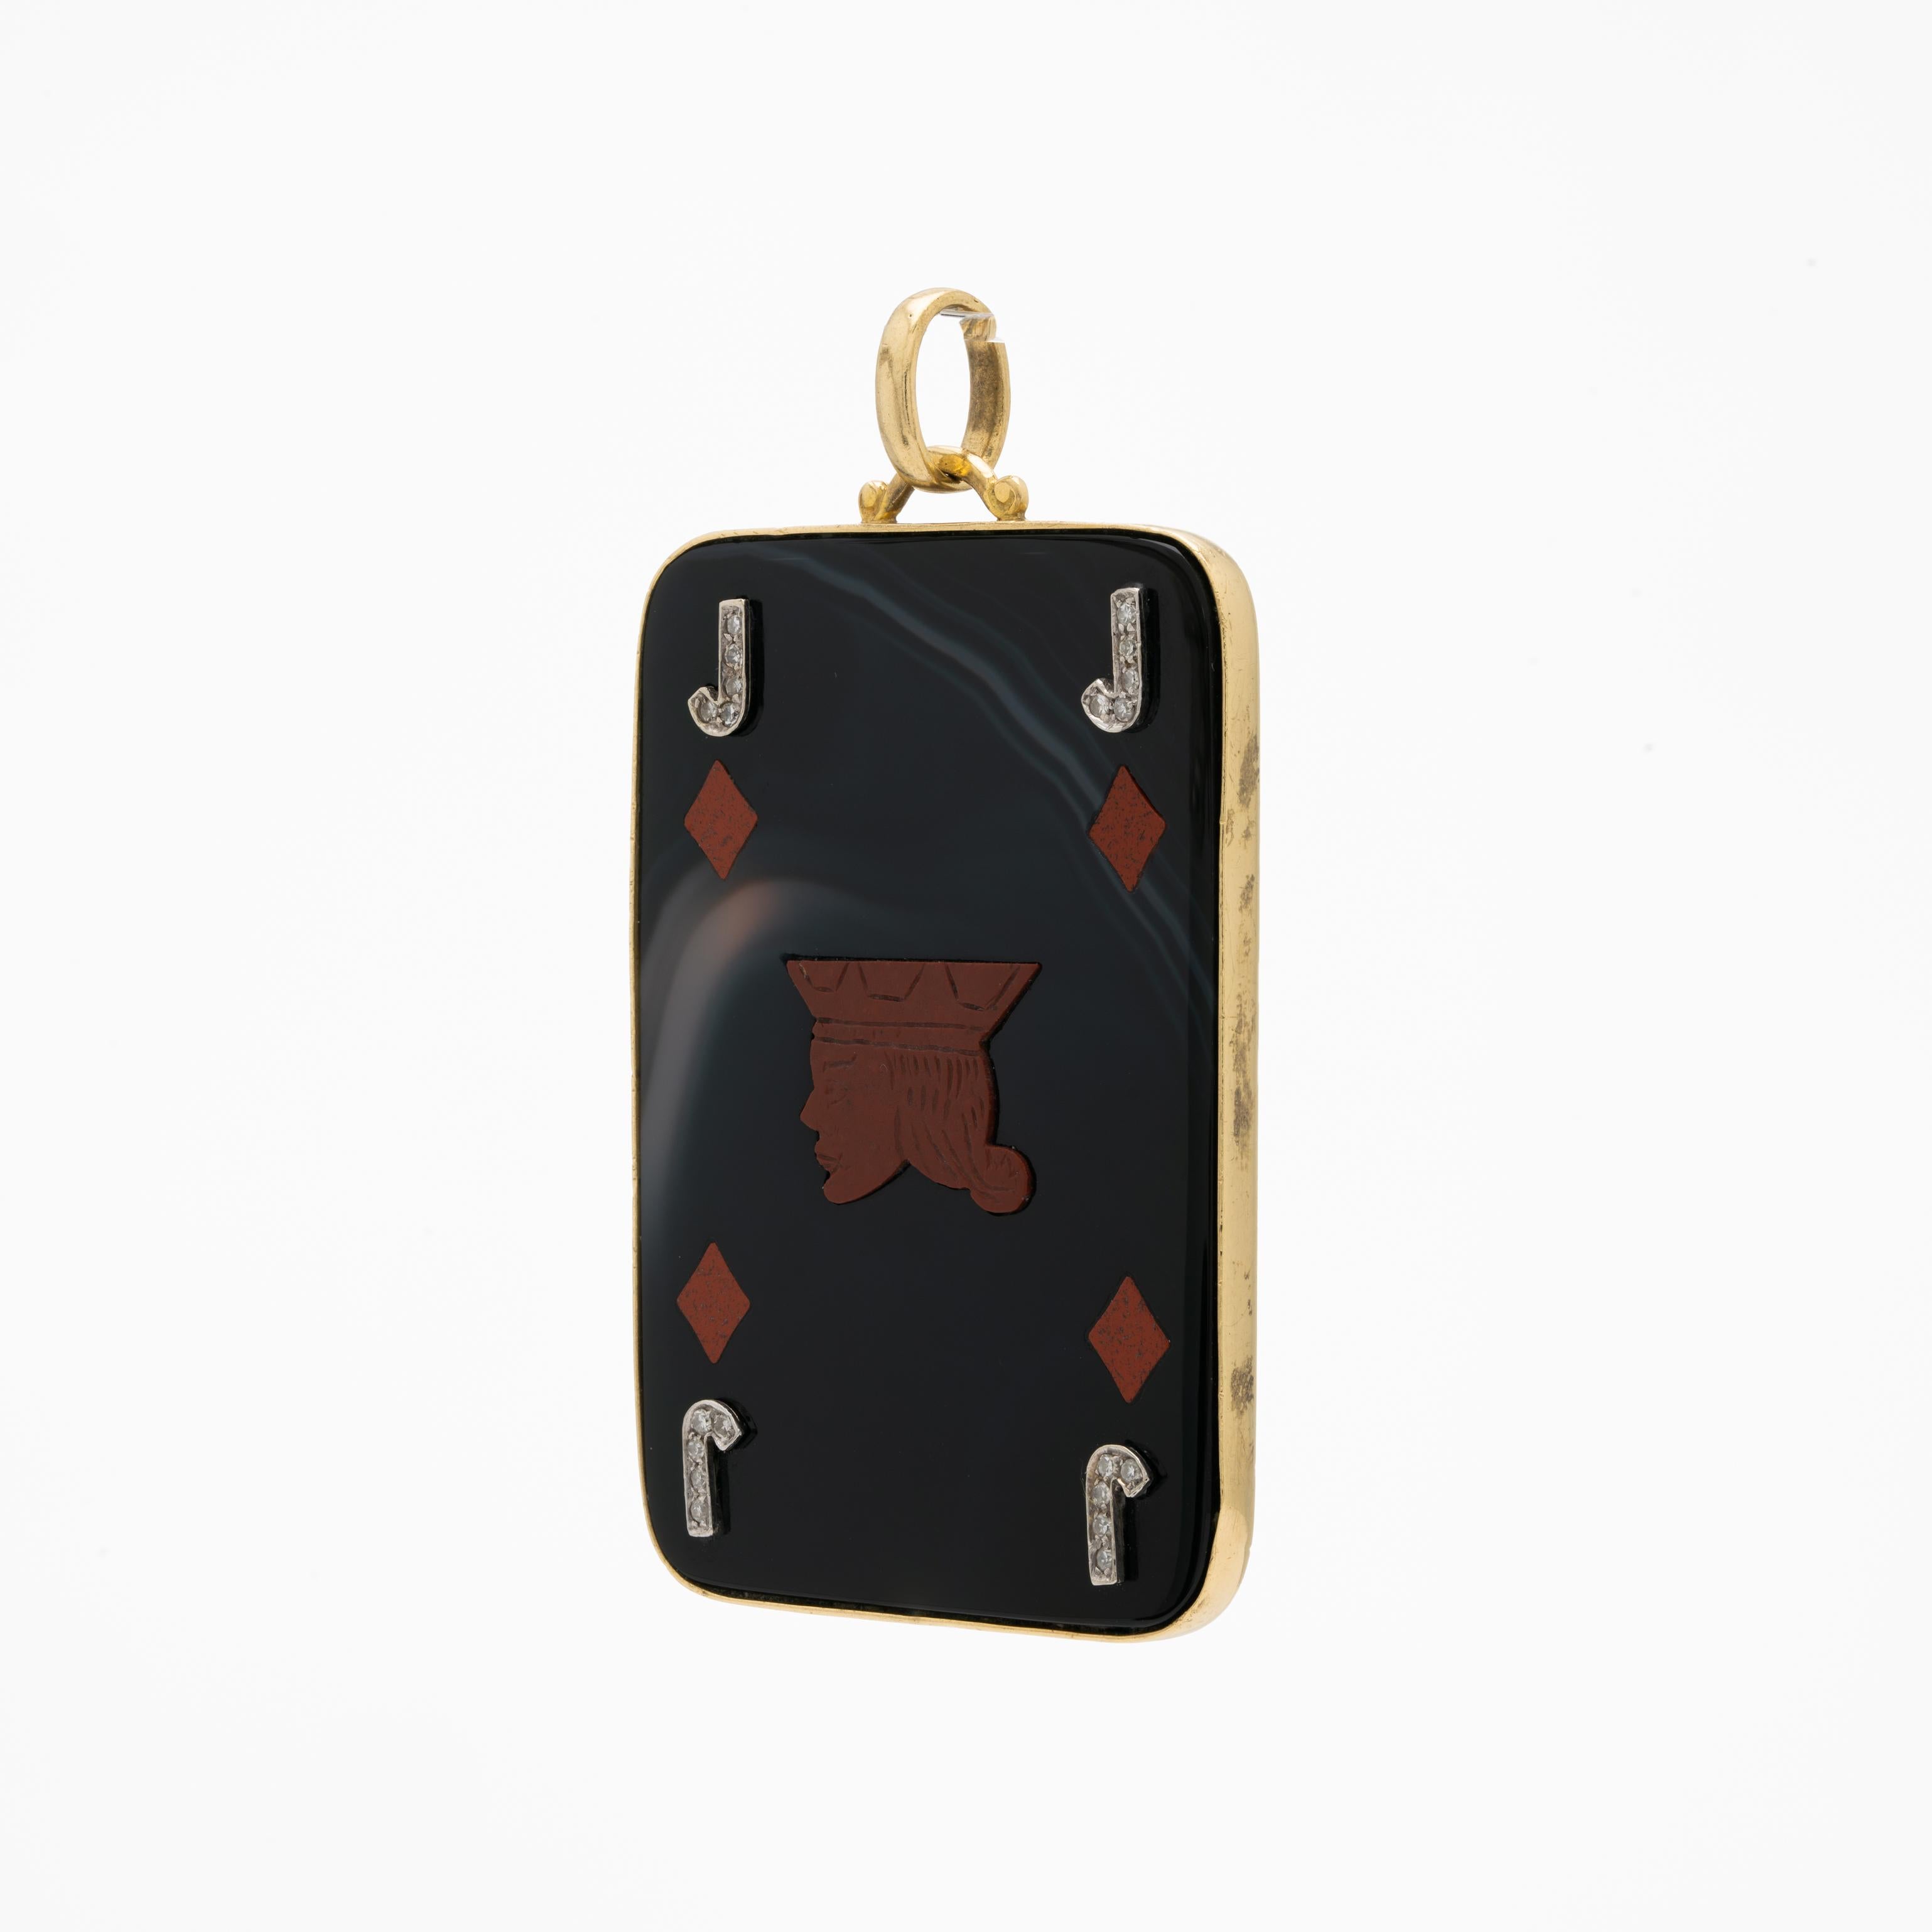 Vintage 18k Yellow Gold, Agate and Carnelian Jack of Diamonds Pendant c.1970s

According to those who ascribe tarot-like meaning to ordinary playing cards, the Jack of Diamonds represents a drive and craftiness in all financial endeavors. This